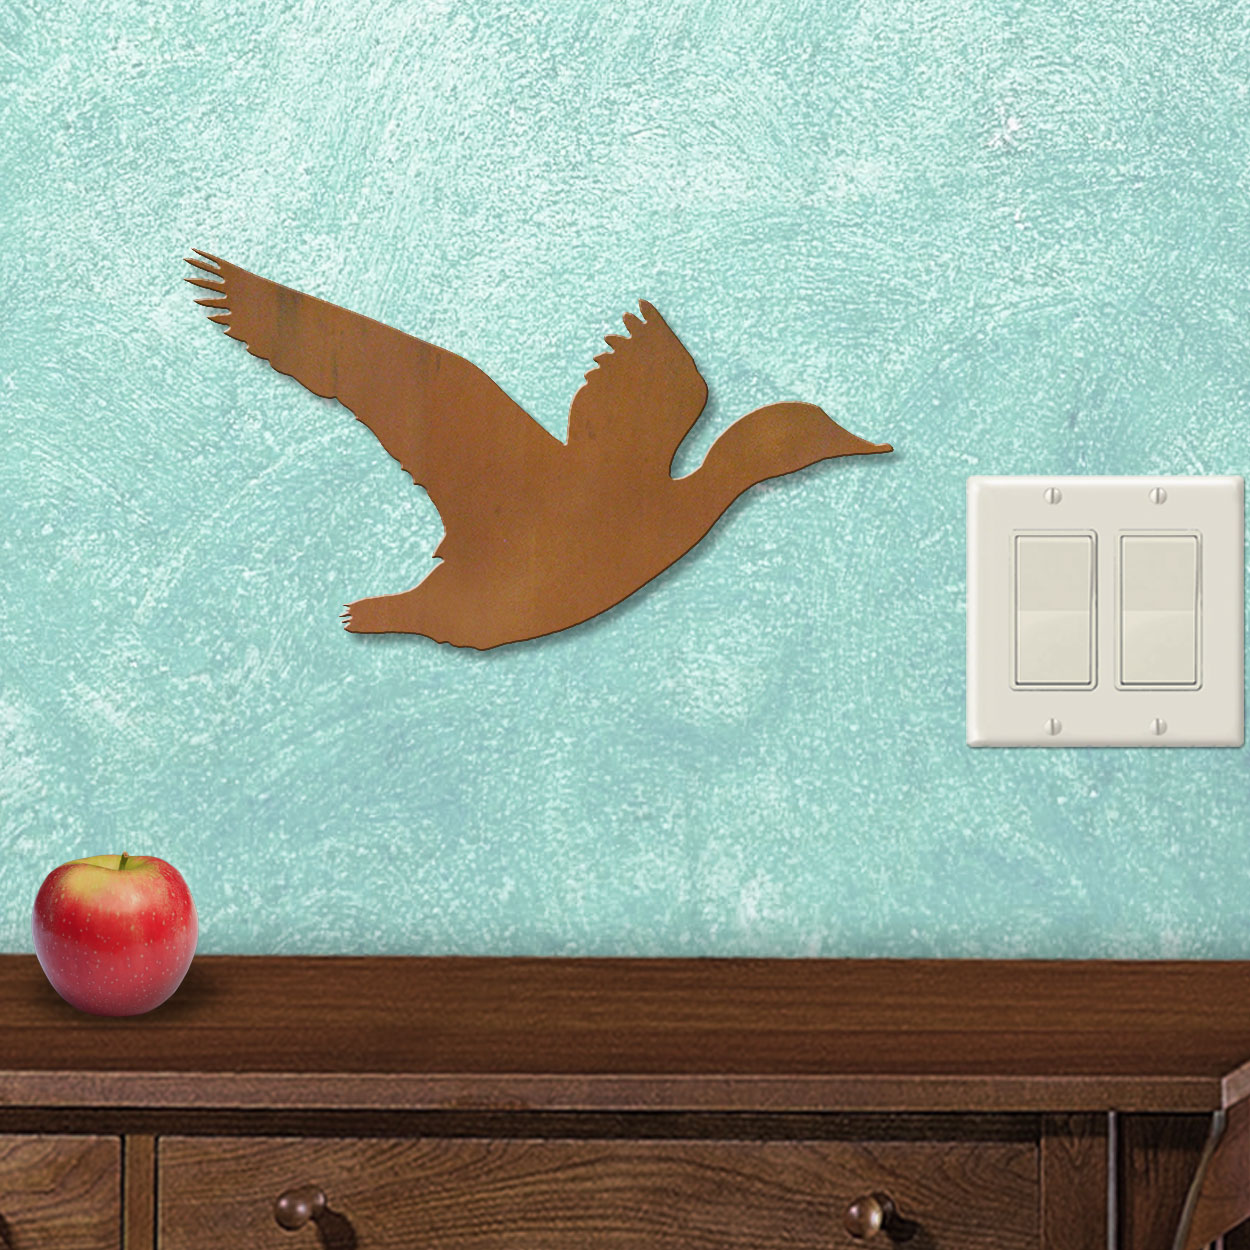 625469S - Flying Duck 2 Lodge Decor Small 12in Wall Art - Choose Color